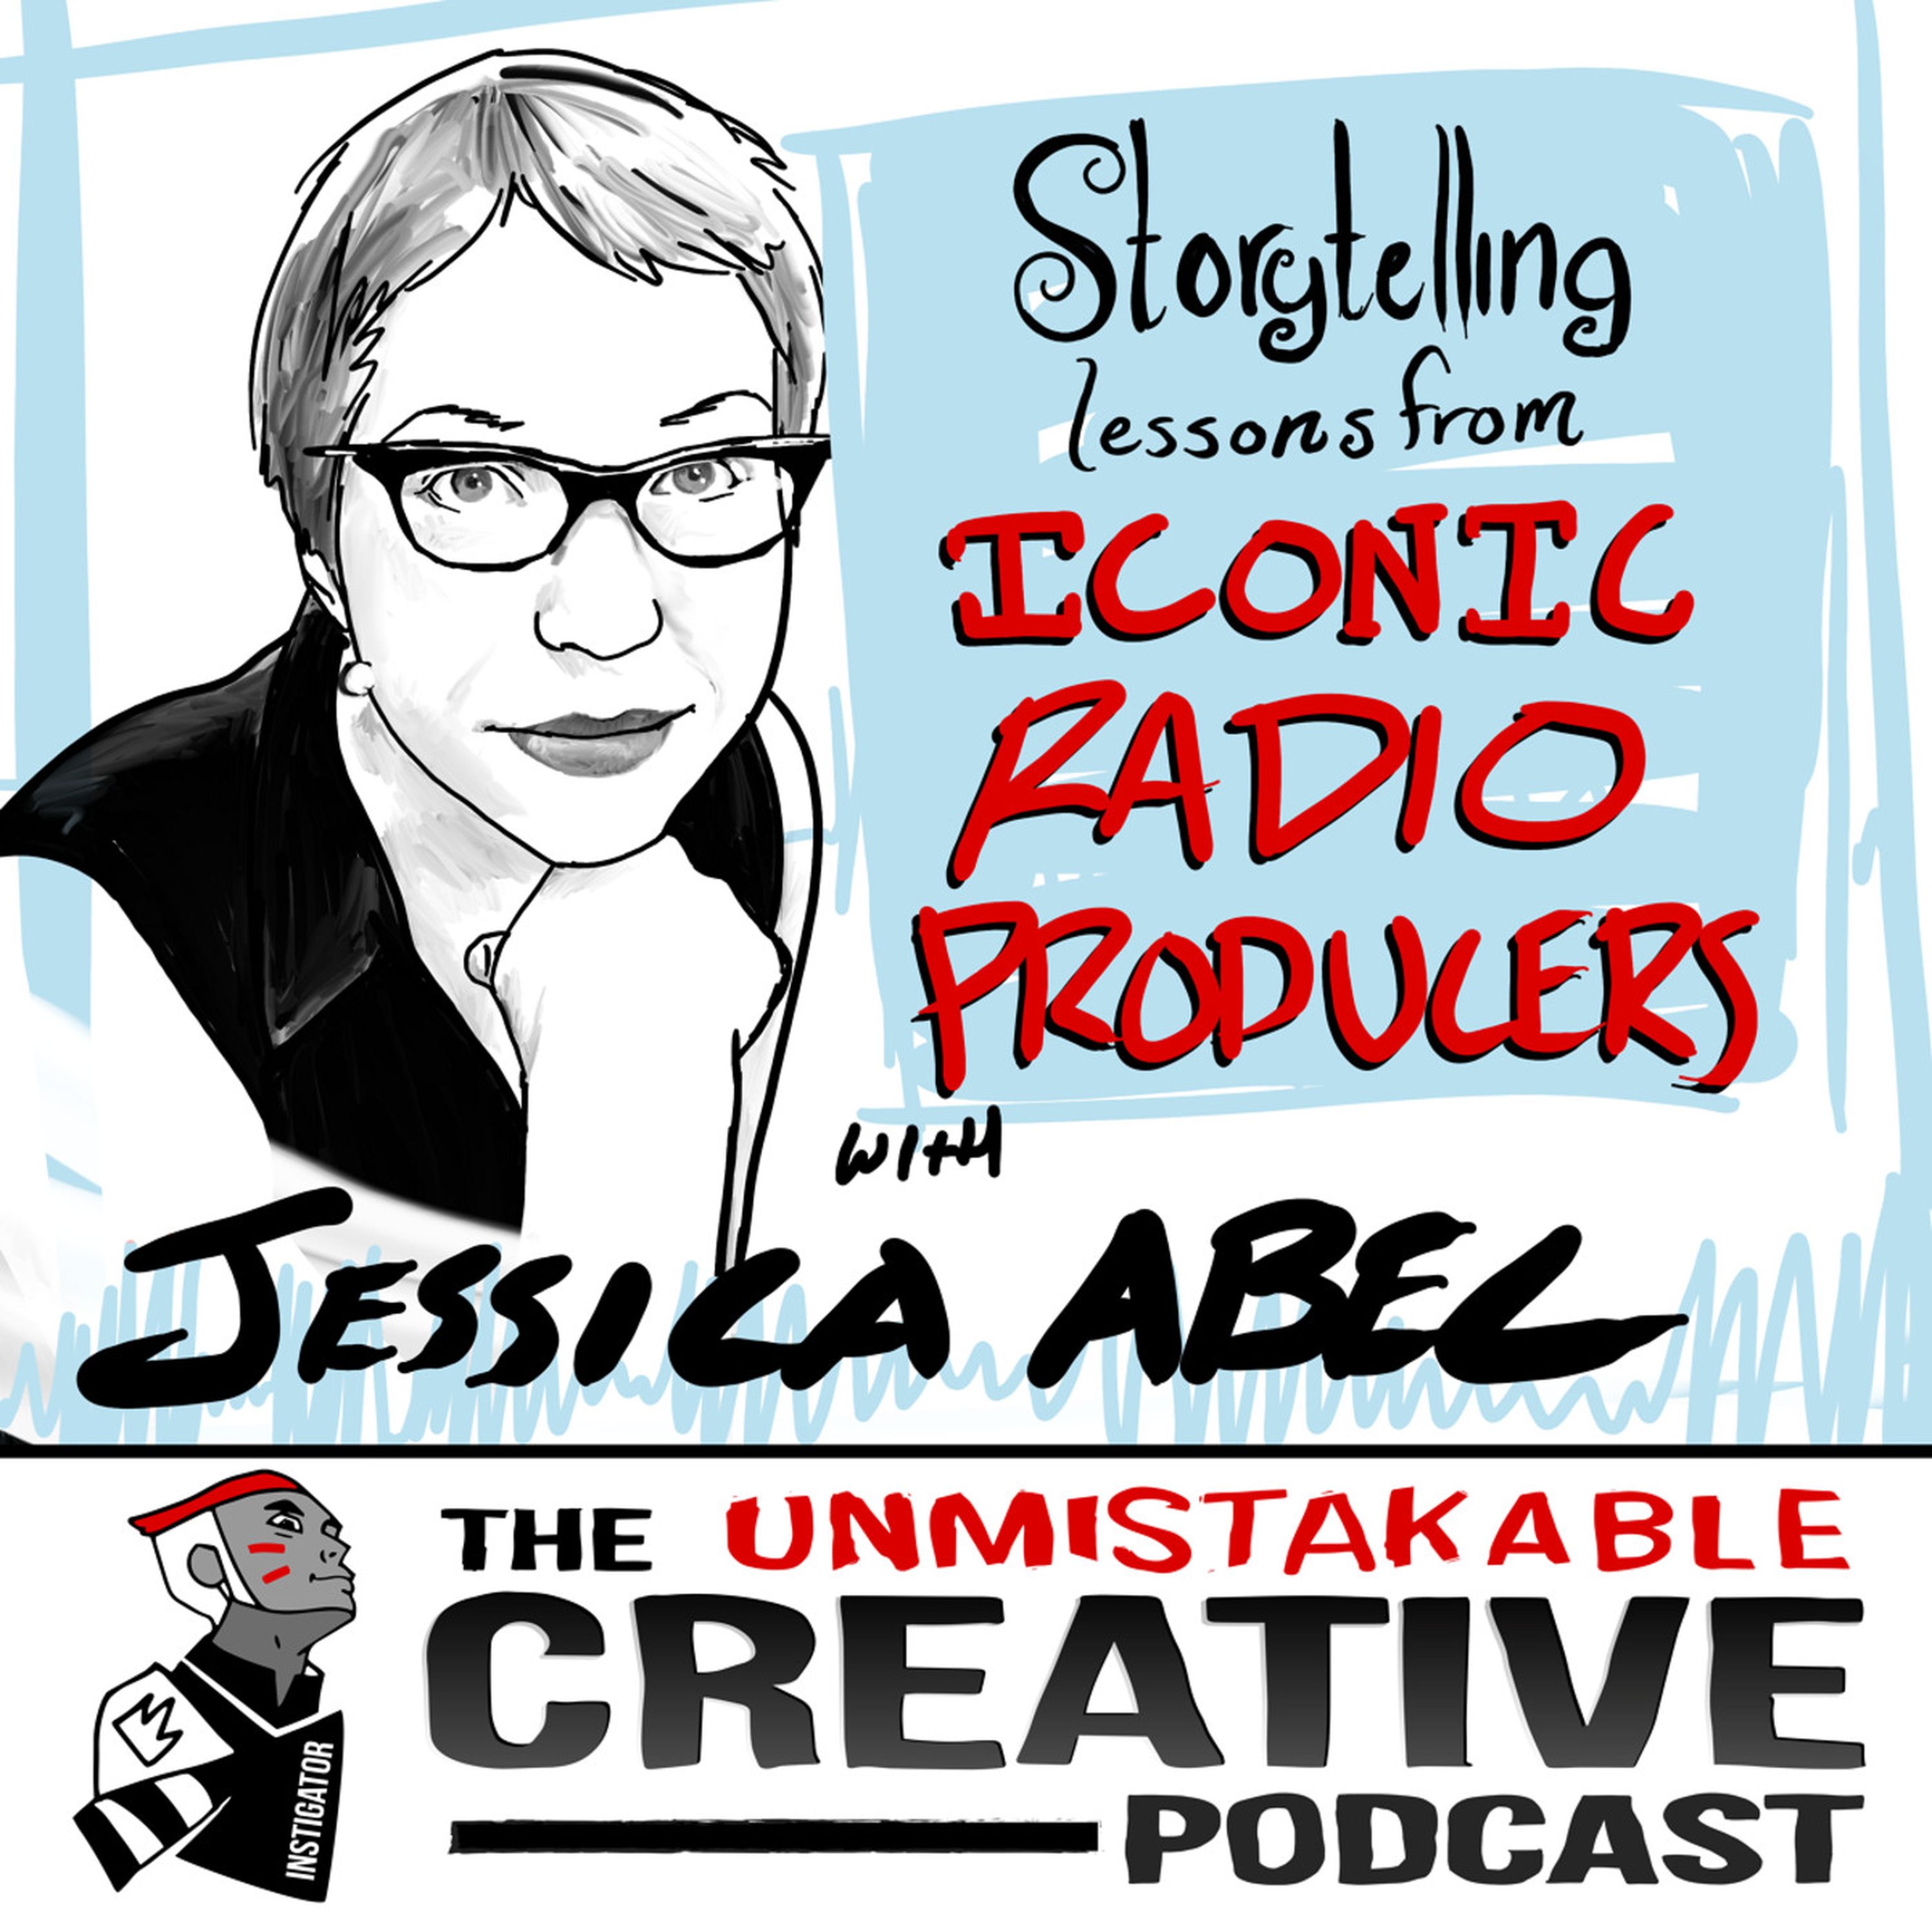 Storytelling Lesson from Iconic Radio Producers with Jessica Abel Image